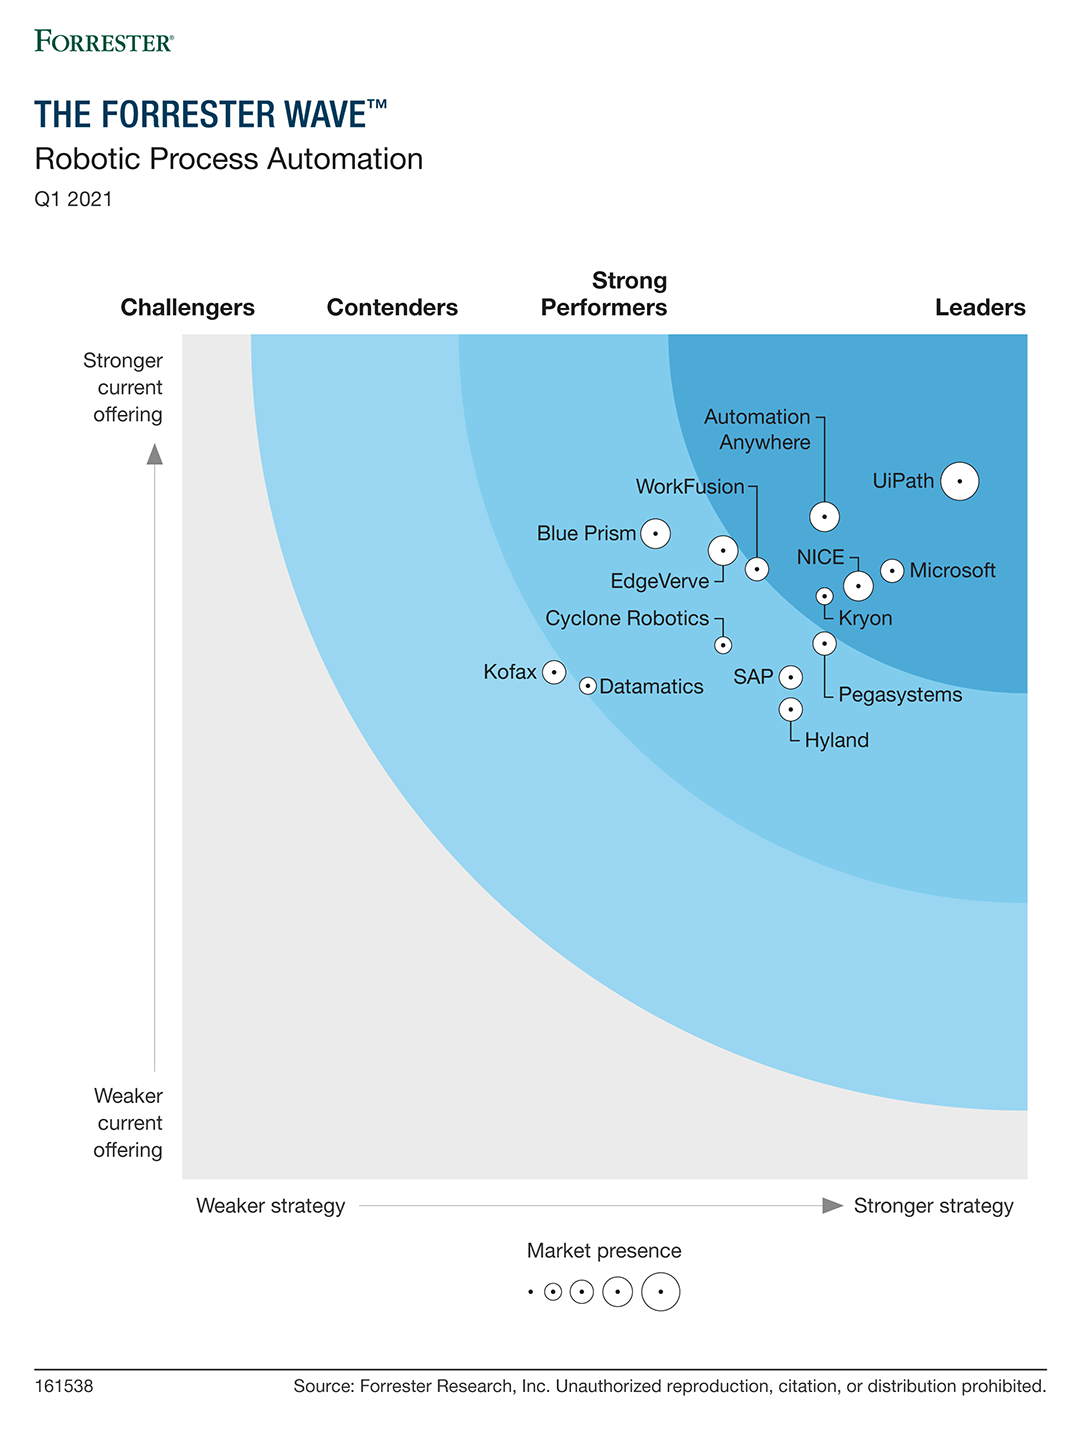 UiPath Named a Leader in 2021 Forrester Wave RPA Report